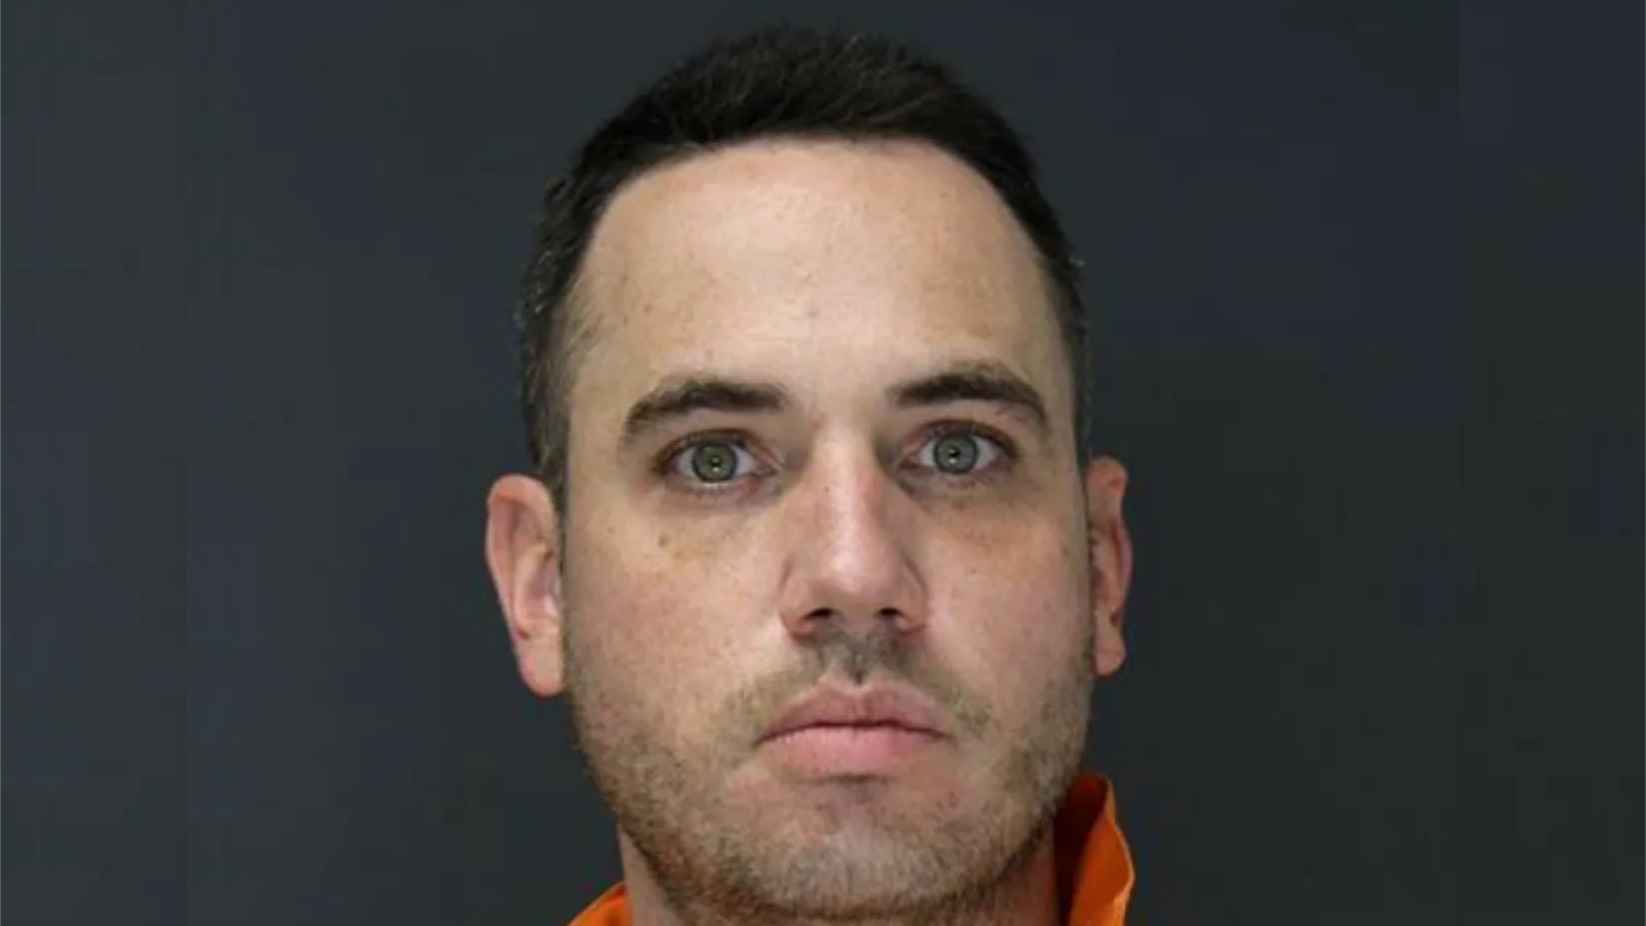 Prosecutor Montvale man jailed over homemade child porn, assault, endangerment — Pascack Press and Northern Valley Press pic